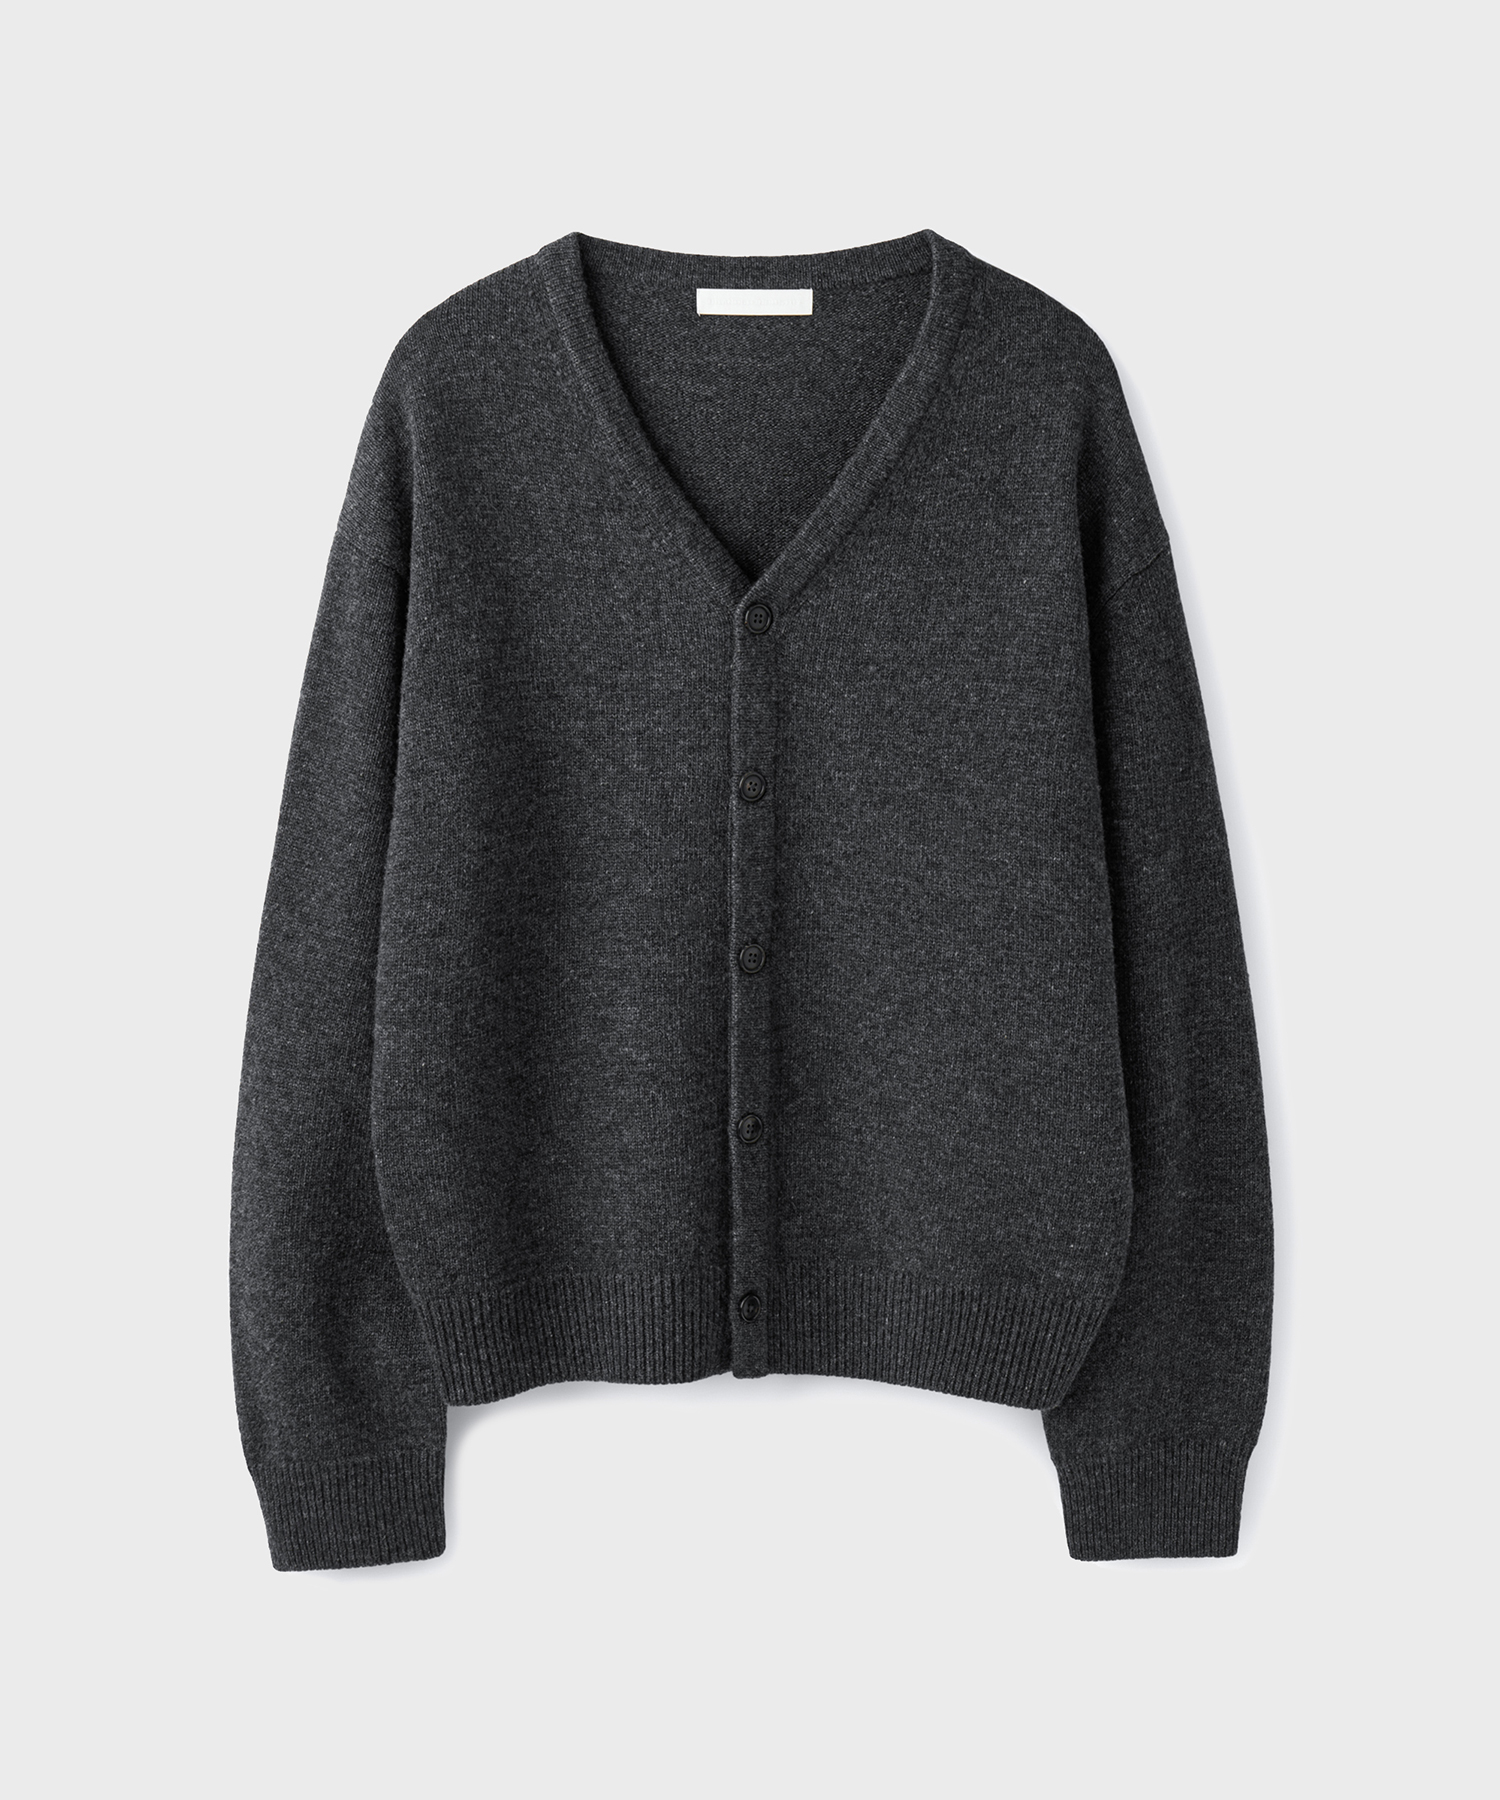 NEWDAY V-NECK CARDIGAN [CHARCOAL]